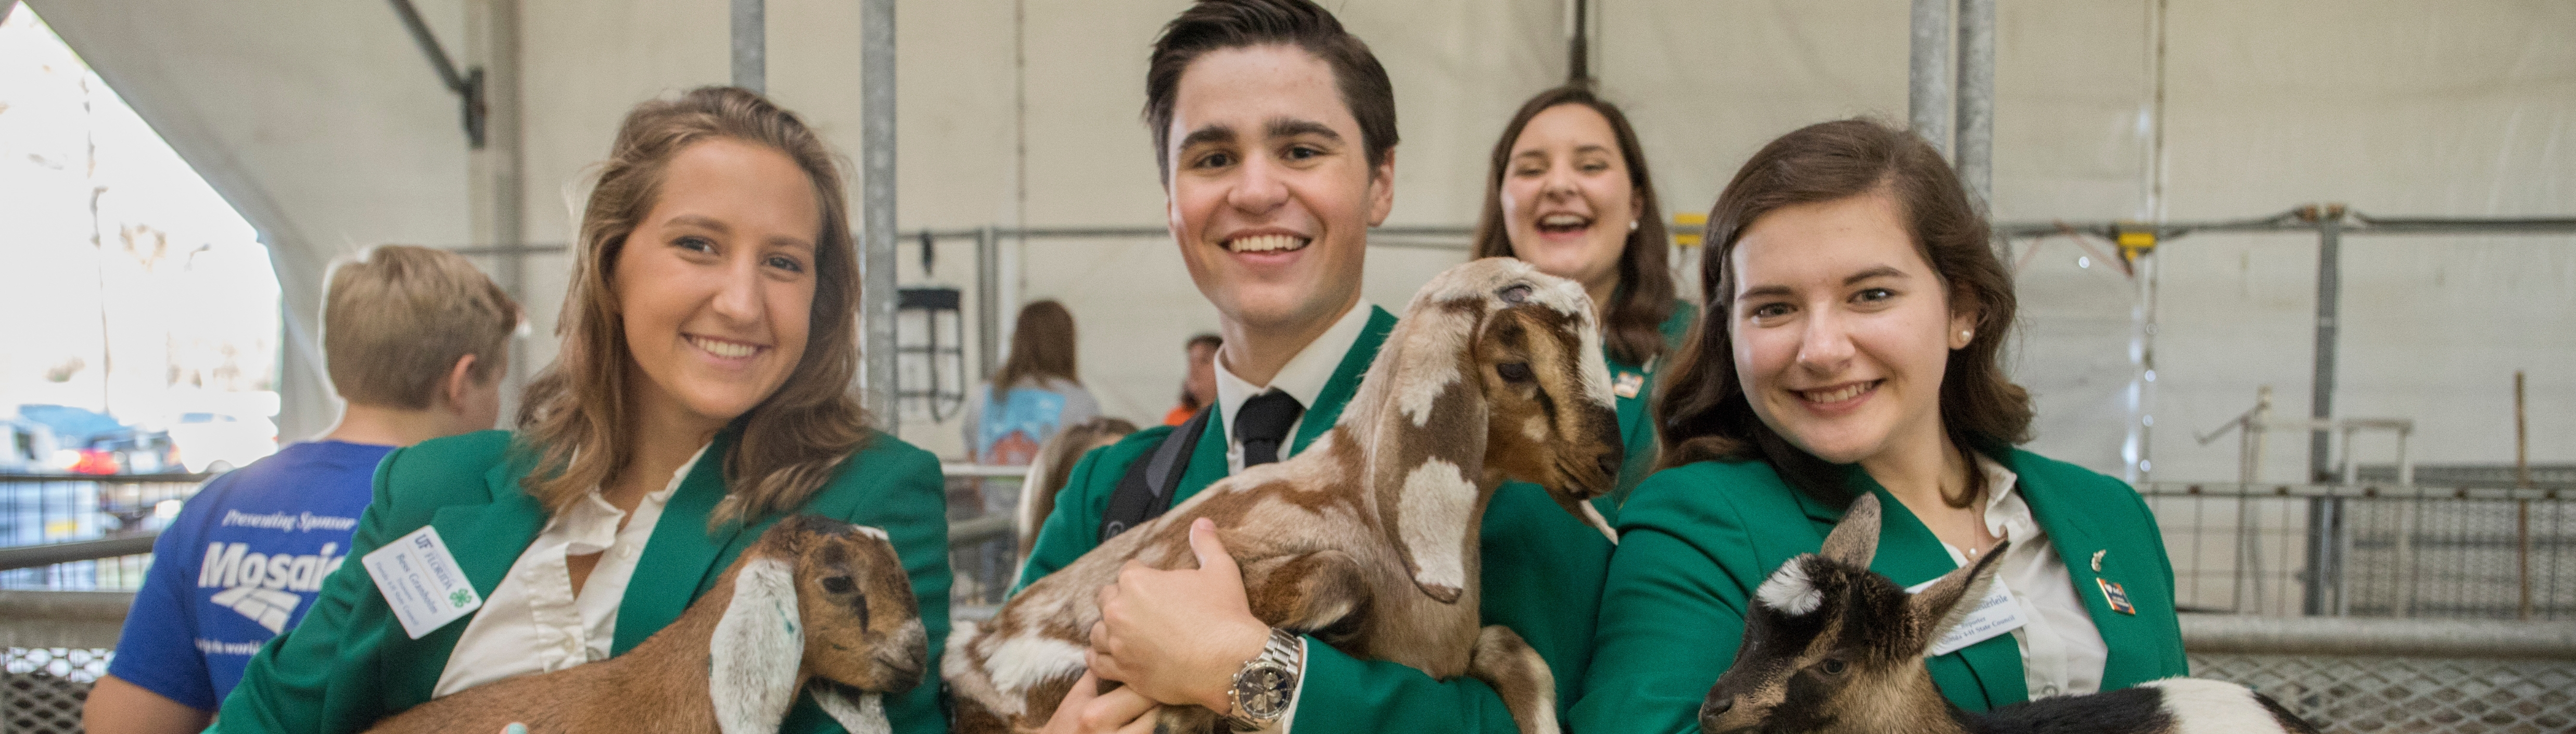 3 youth at the state fair holding baby goats